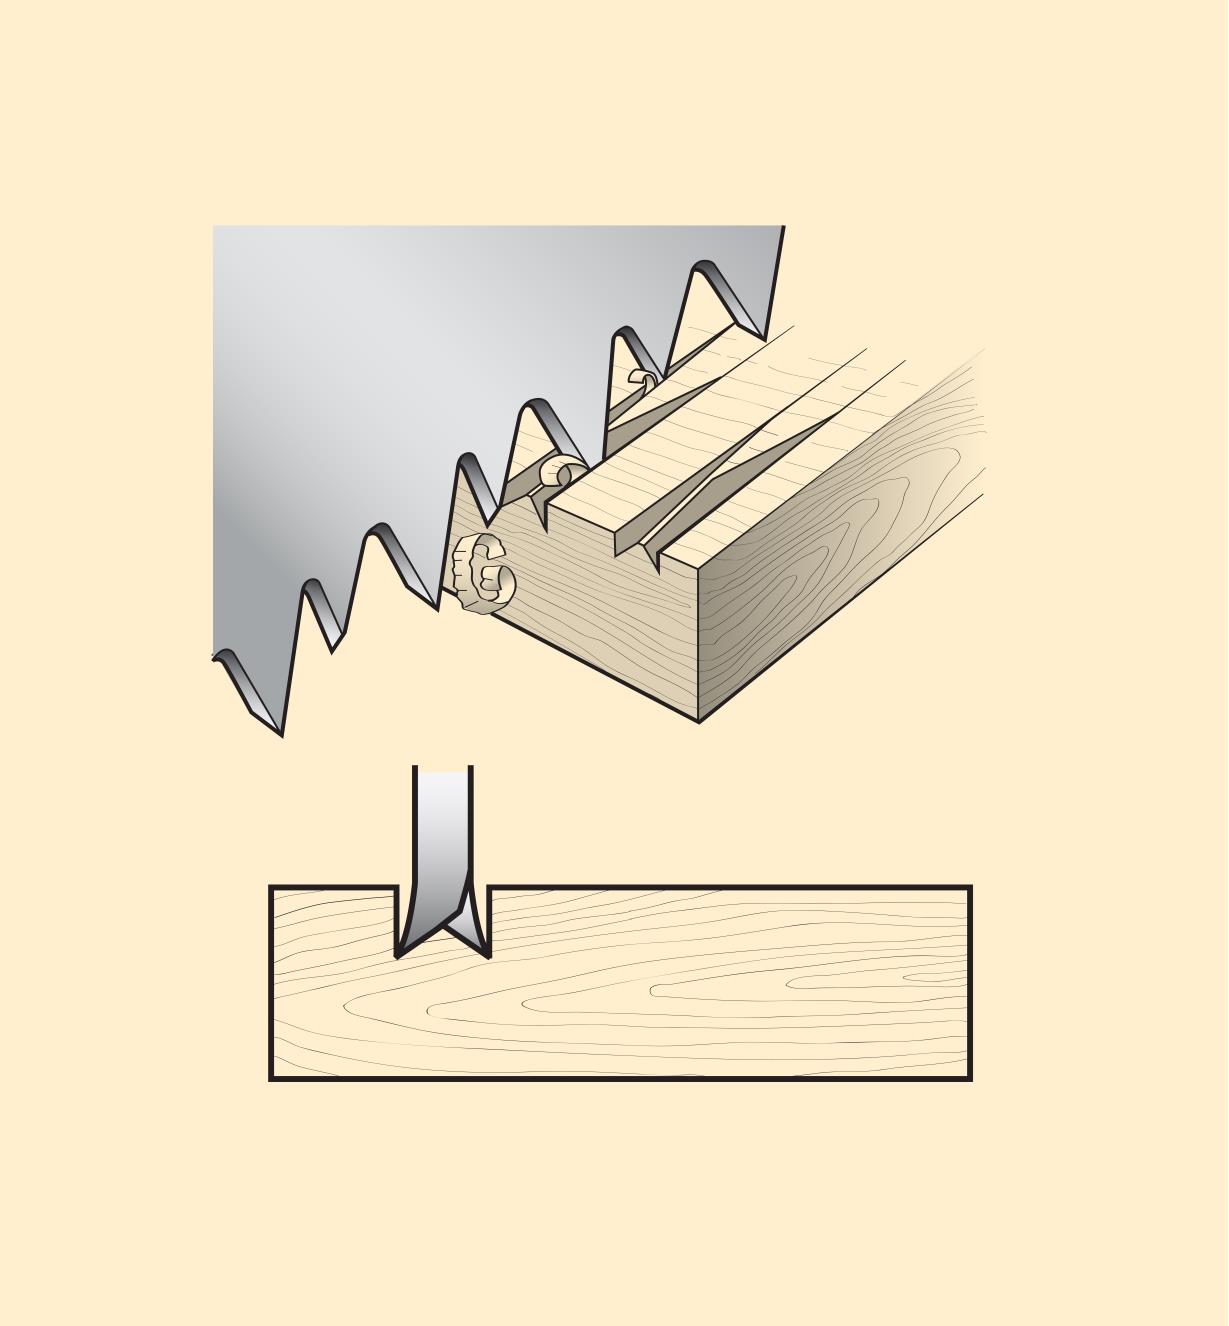 Illustration of cut created by the saw teeth